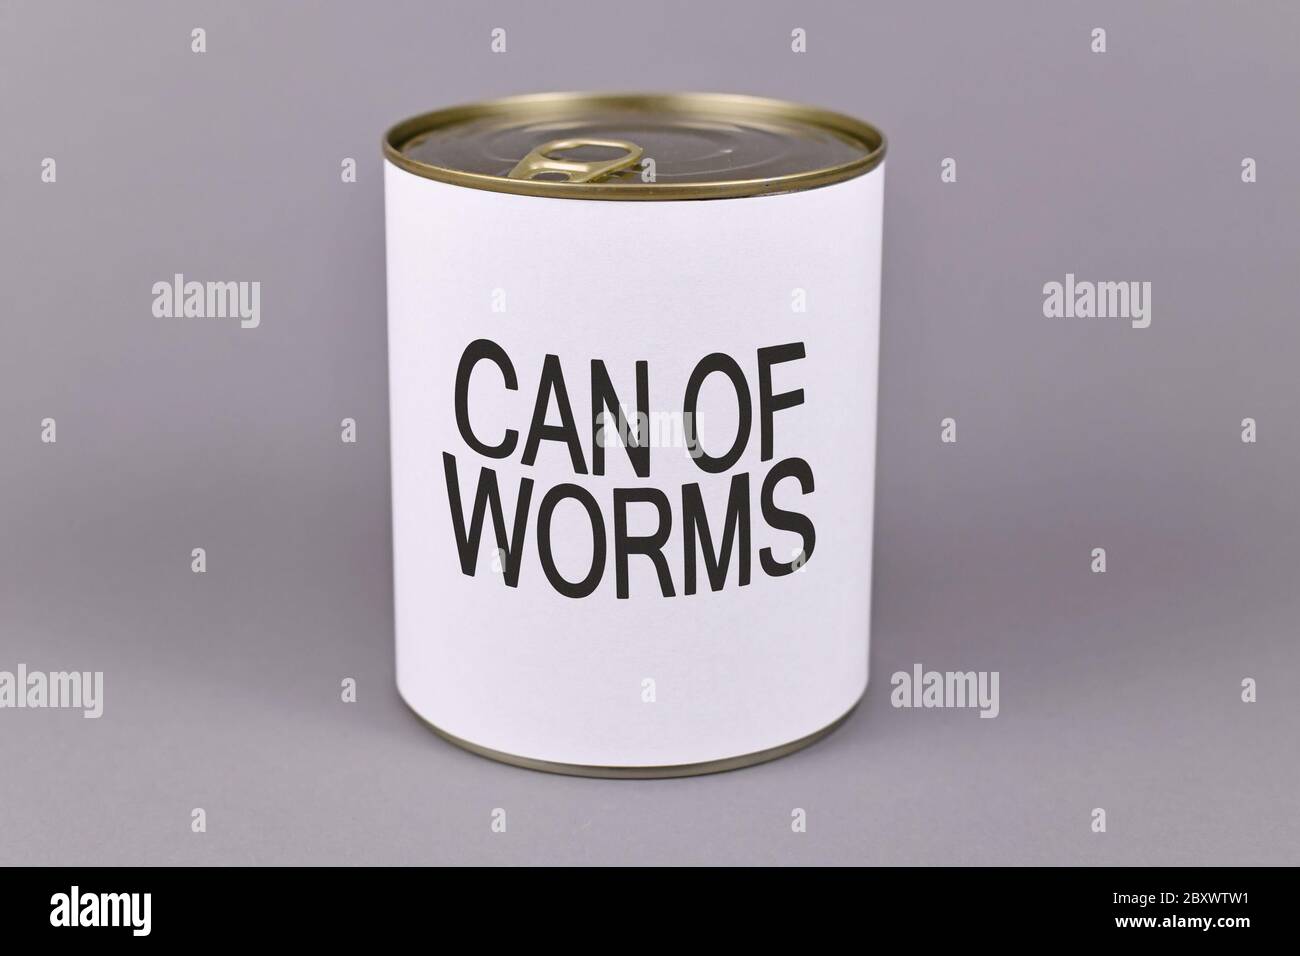 Concept for dfifficult situations and unpleasant experiences showing a tin can with white label and words 'Can of worms' on gray background Stock Photo